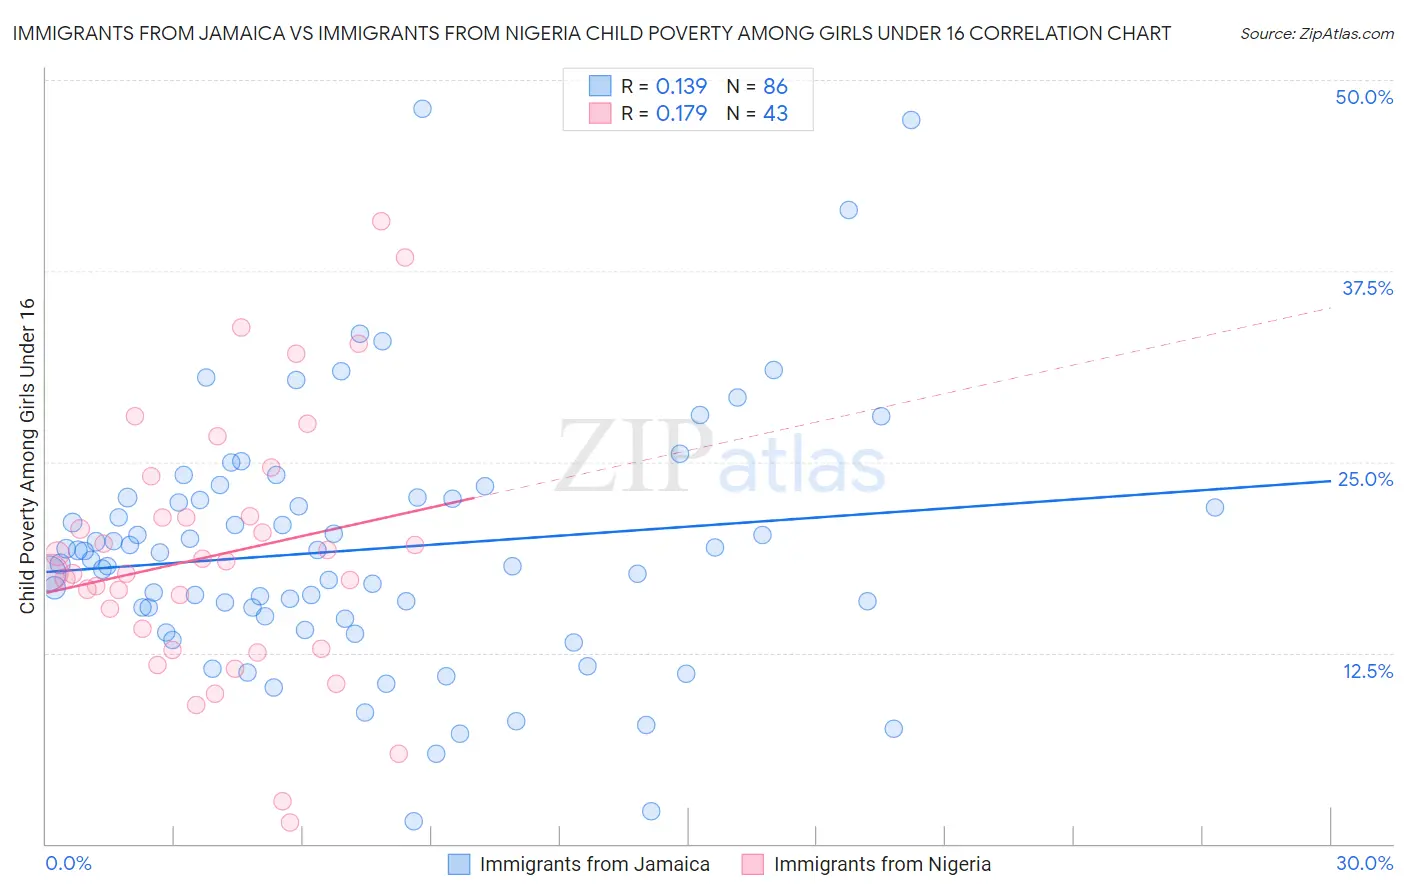 Immigrants from Jamaica vs Immigrants from Nigeria Child Poverty Among Girls Under 16